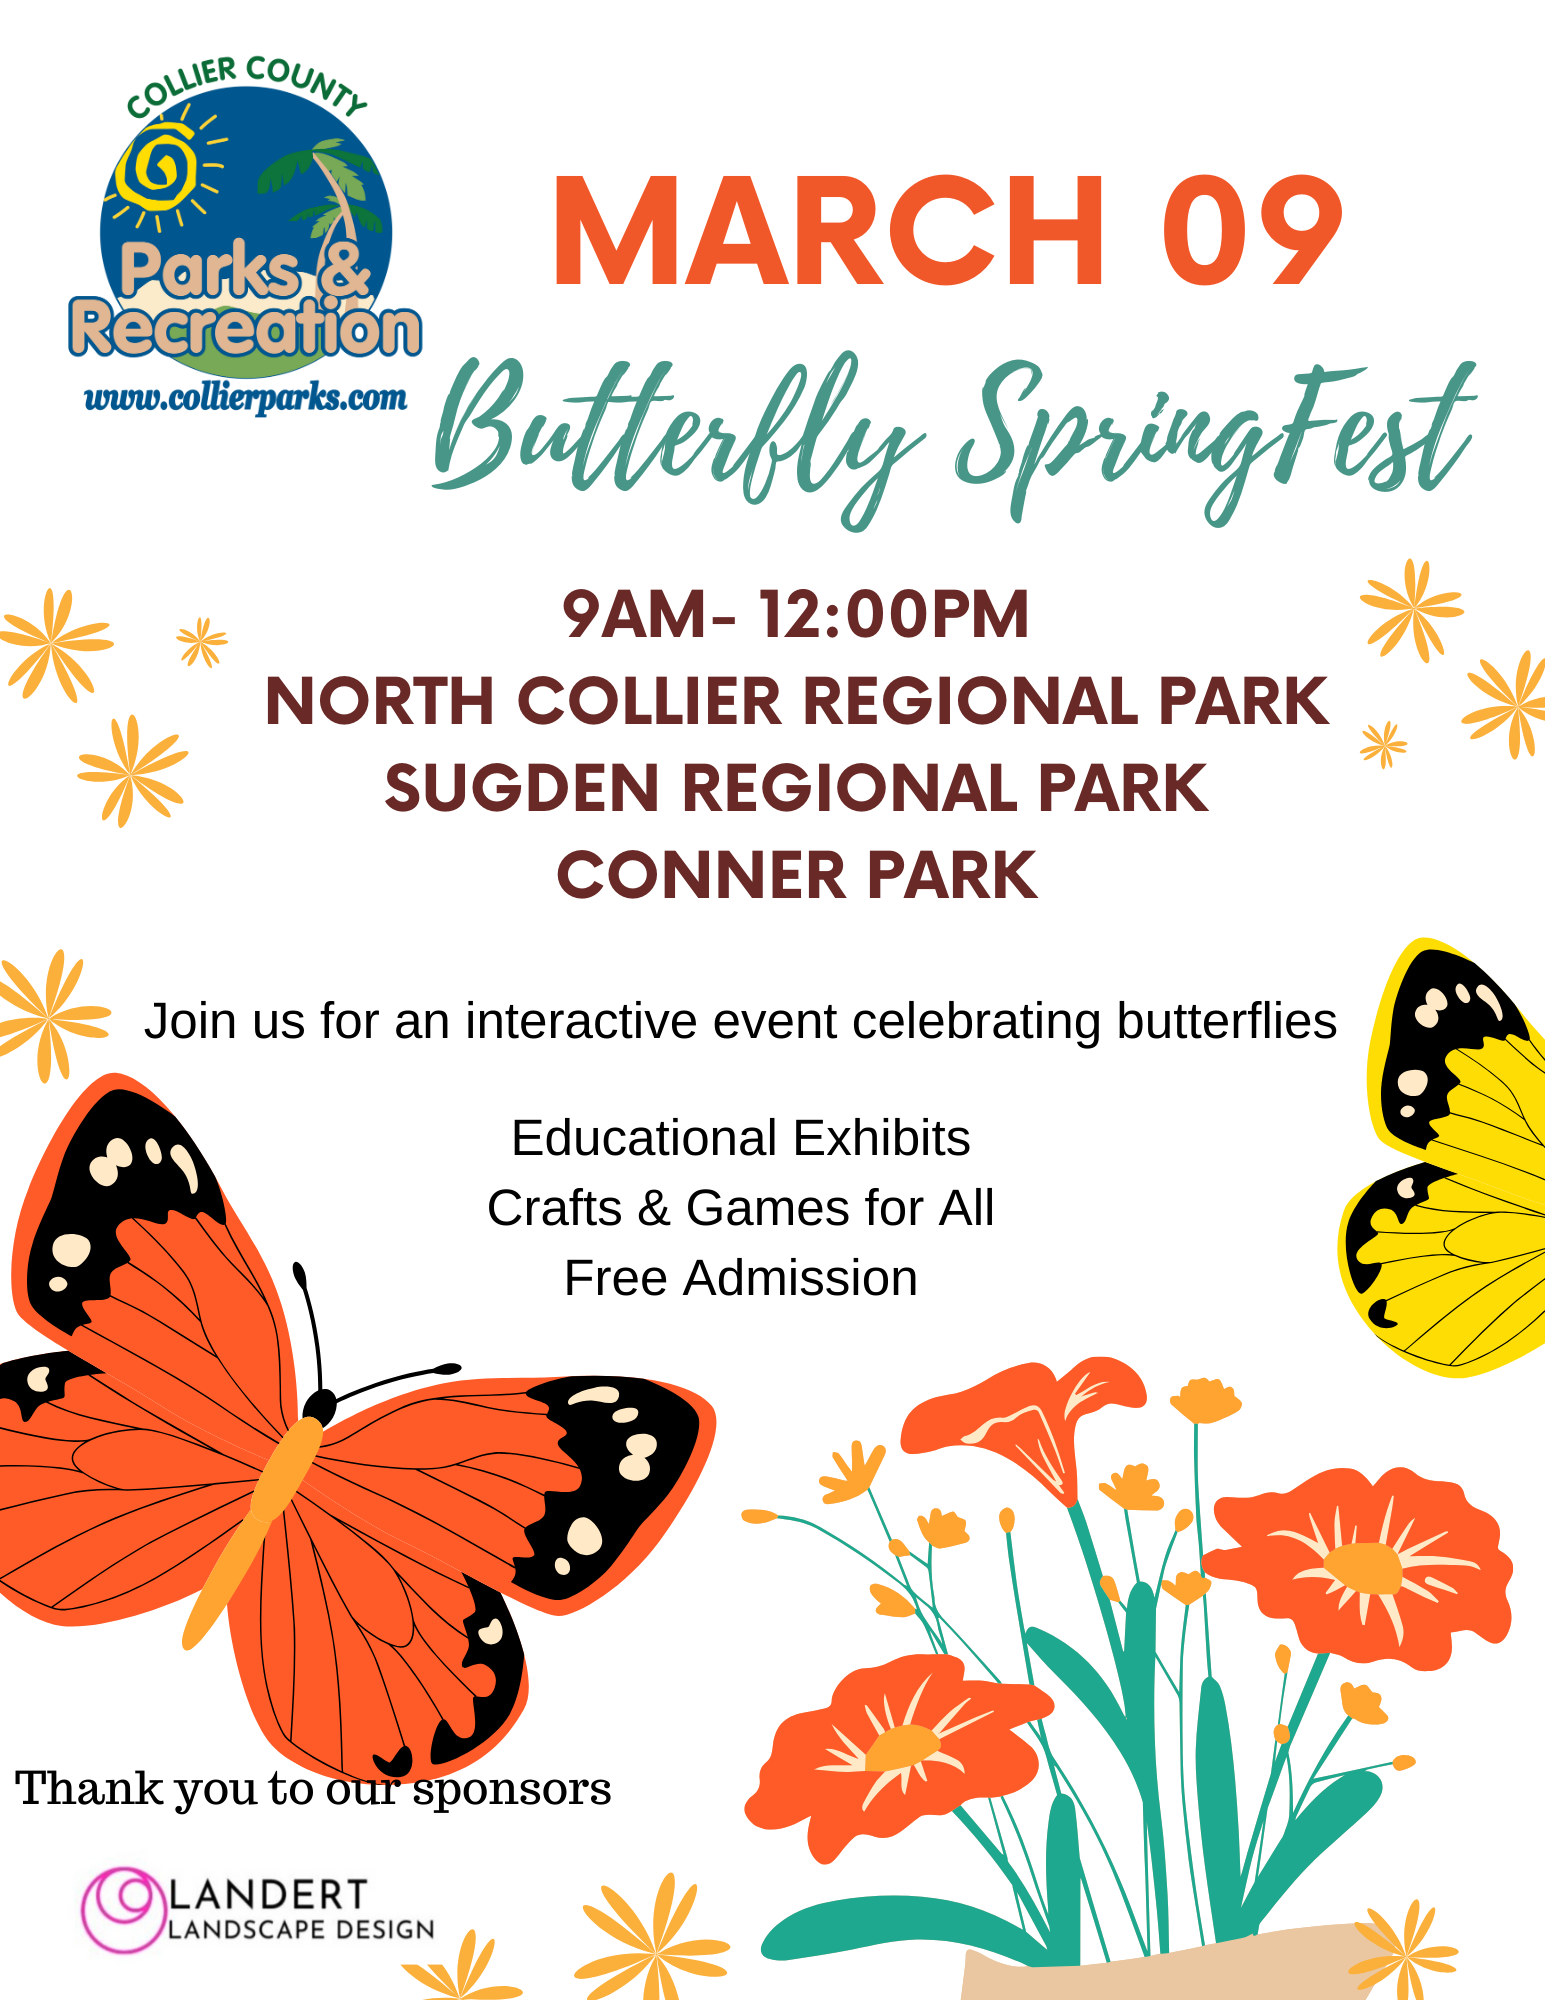 BUTTERFLY SPRING FEST AT NORTH COLLIER REGIONAL PARK